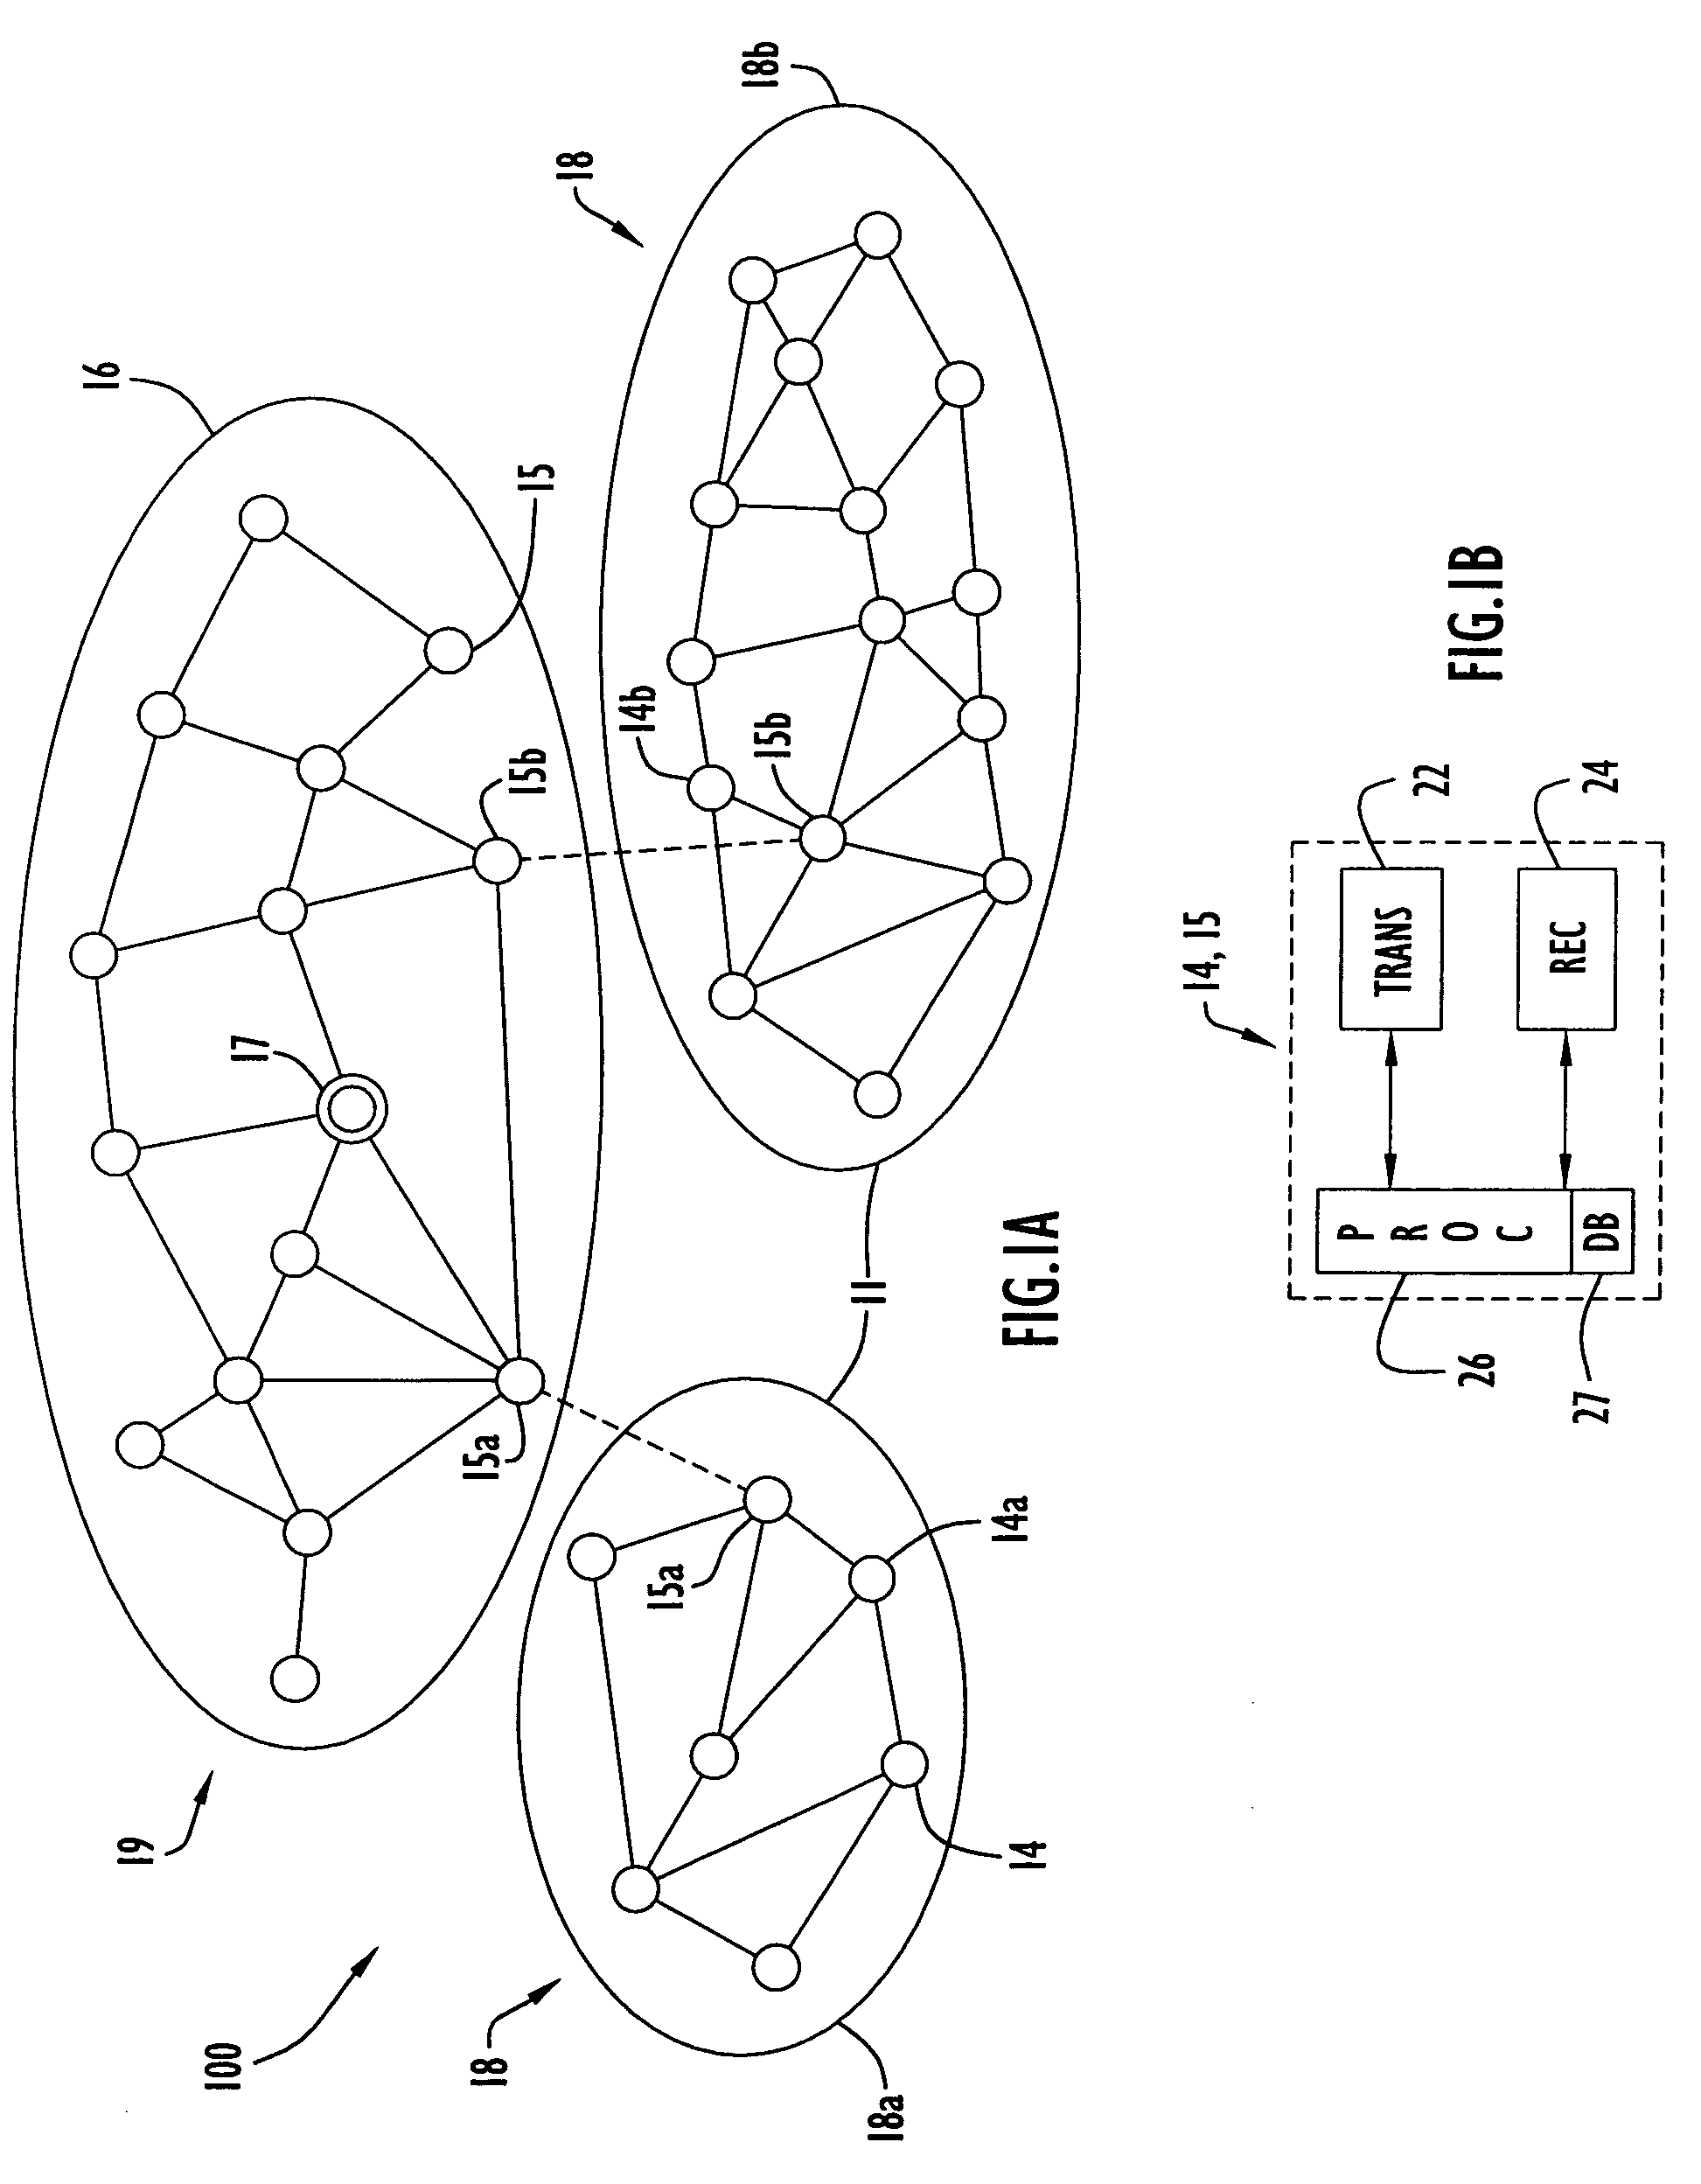 Method and system for efficient network formation and maintenance of node routing databases in a mobile ad-hoc network